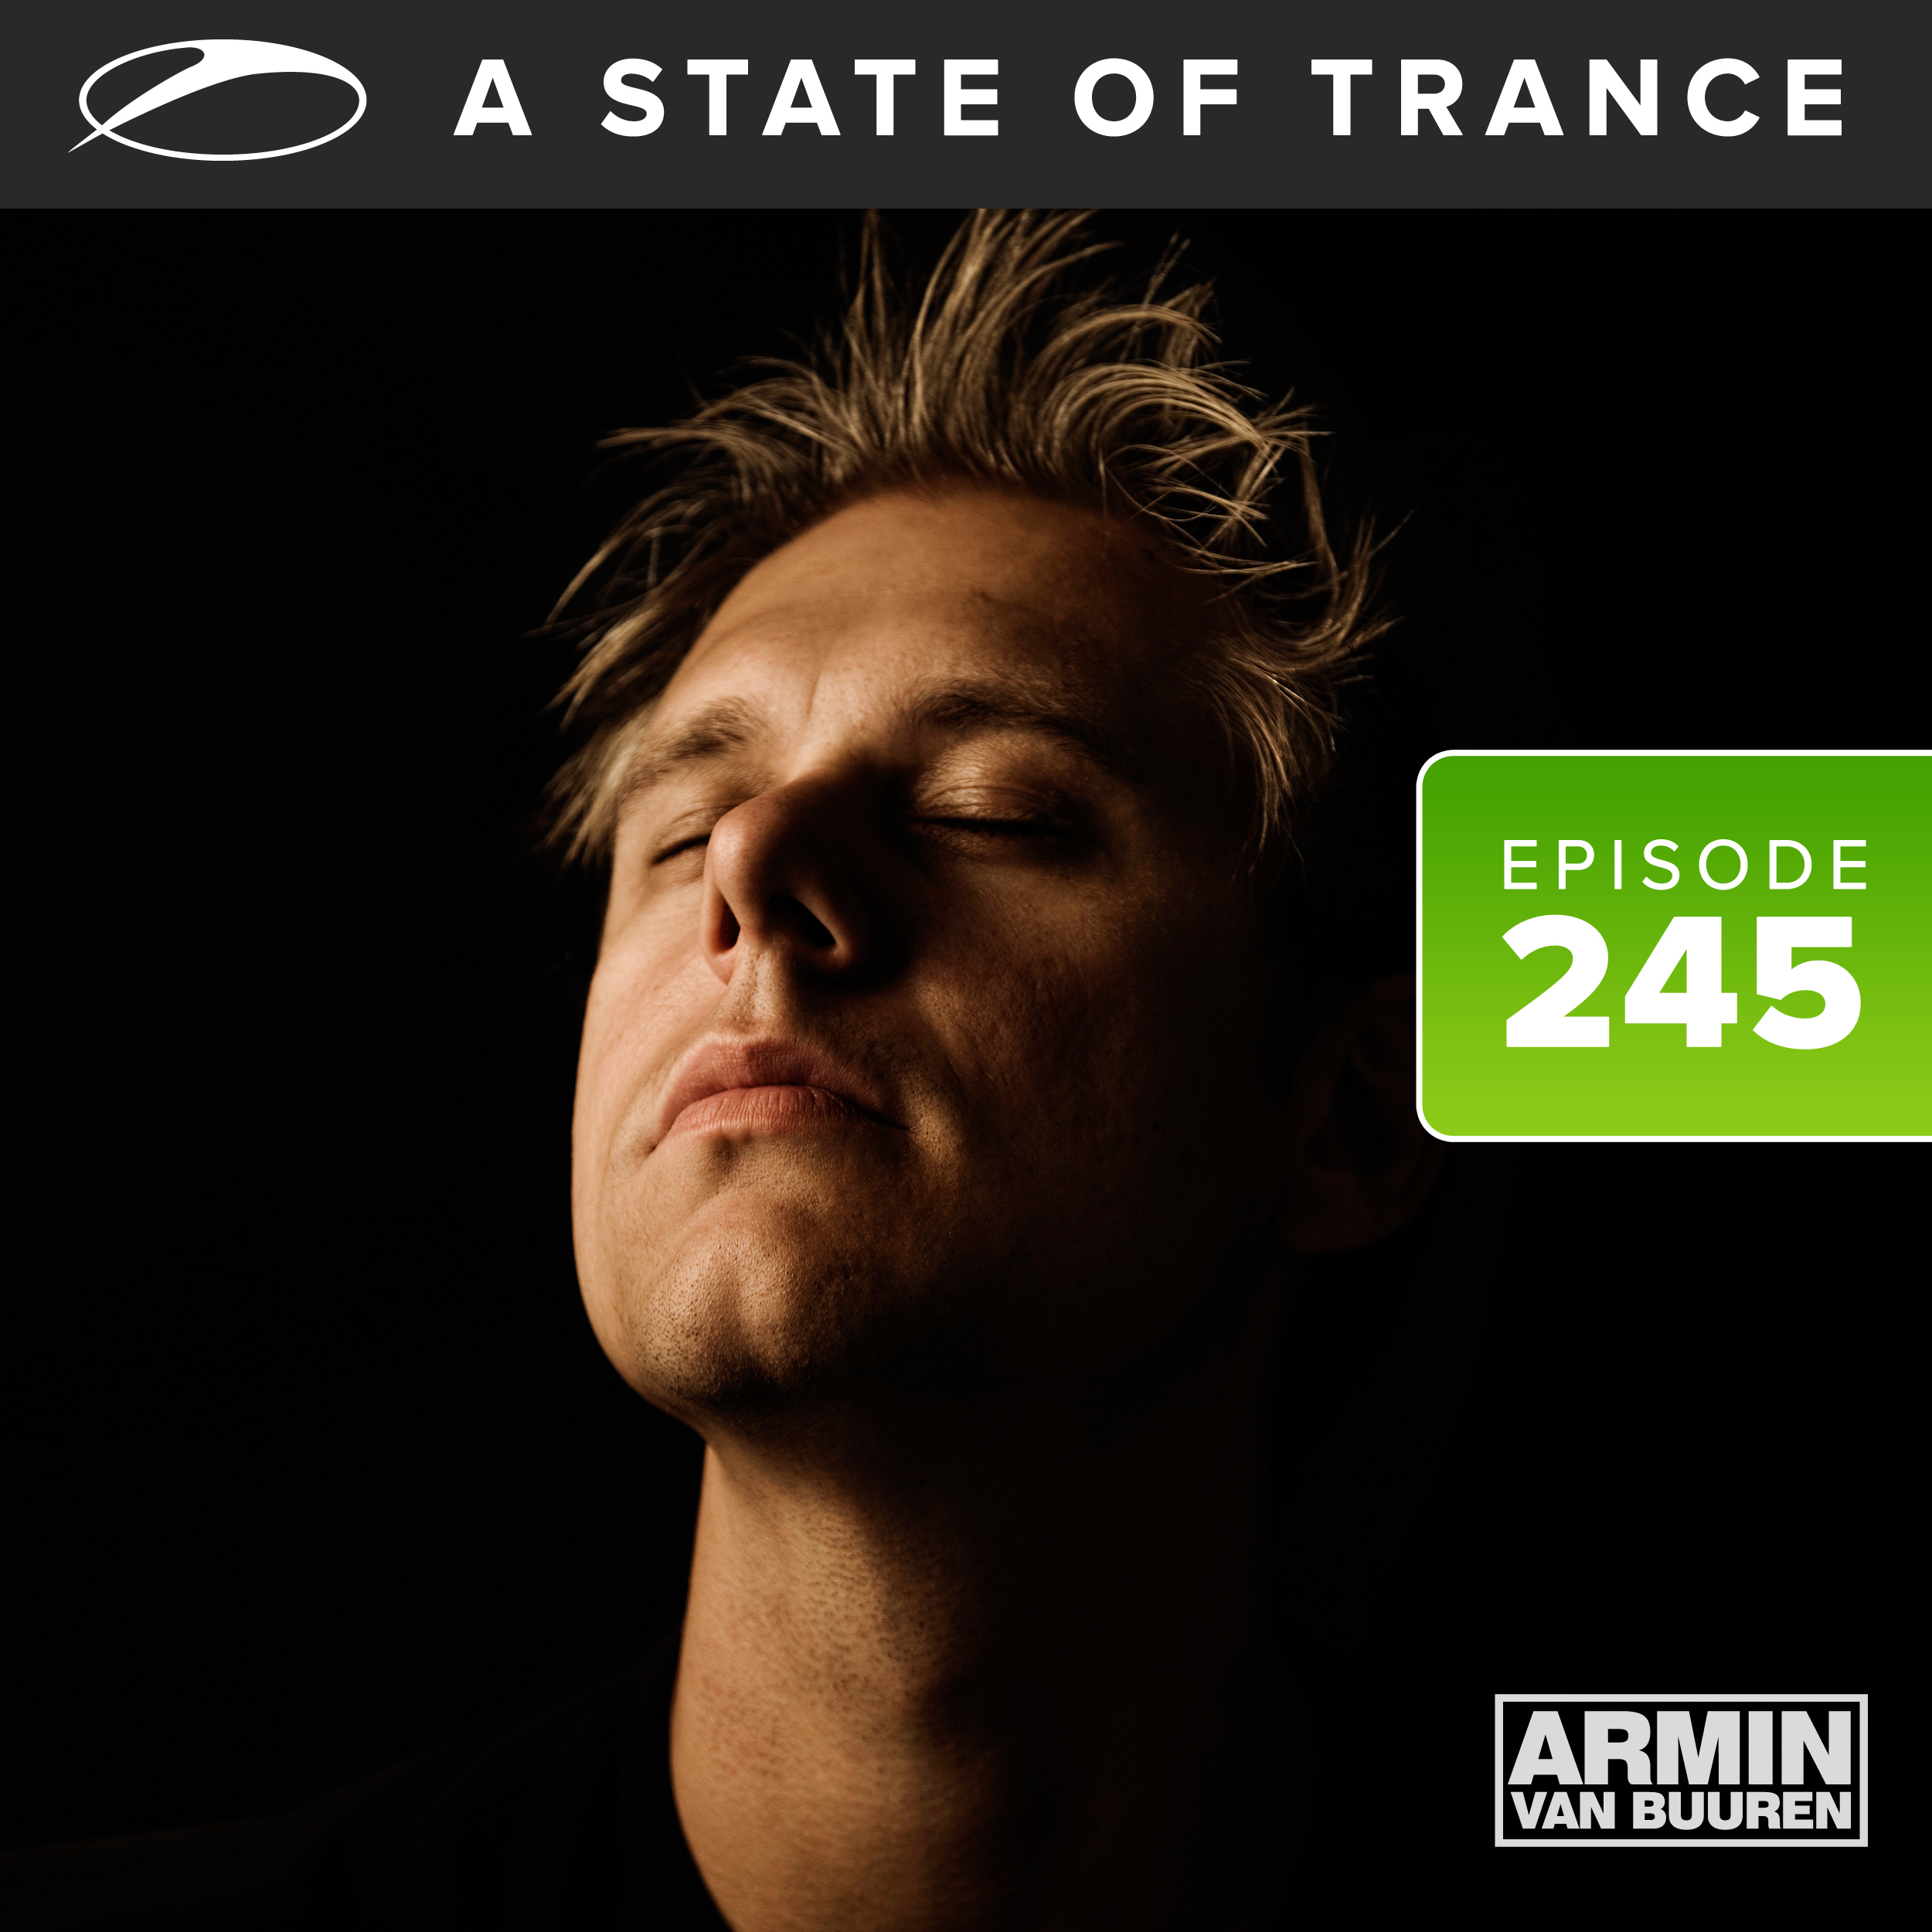 A State Of Trance Episode 245